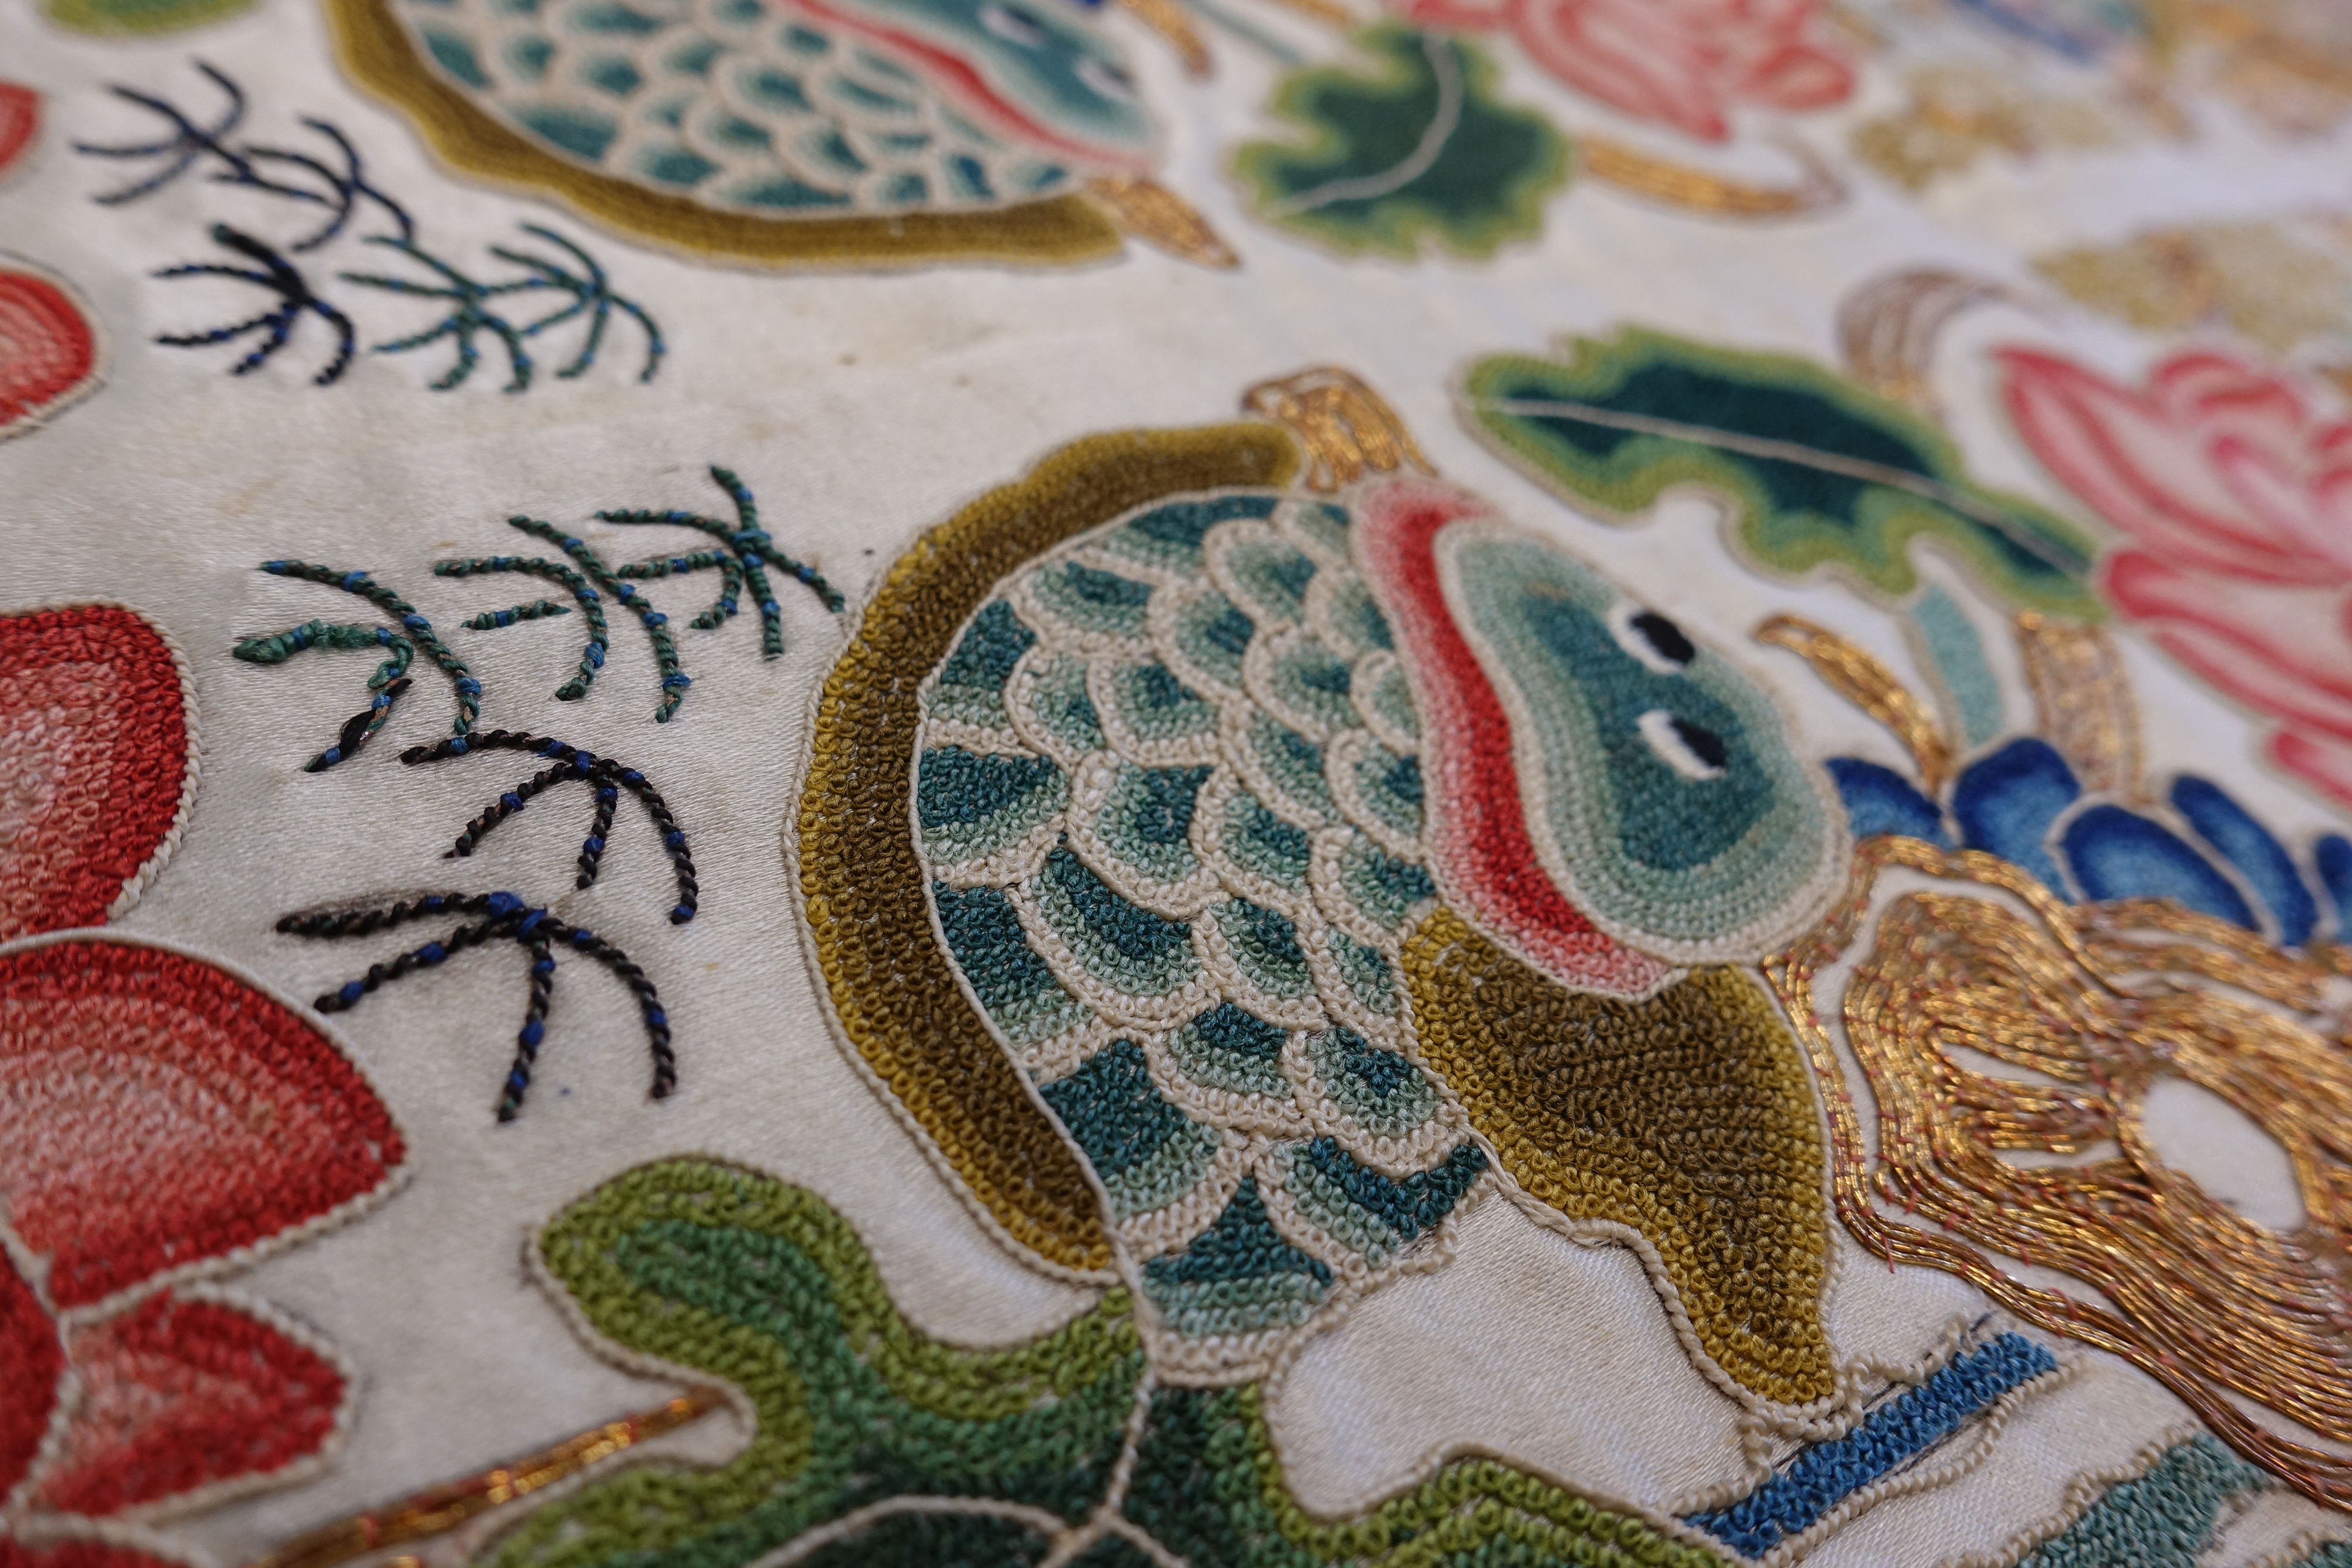 Silk embroidery